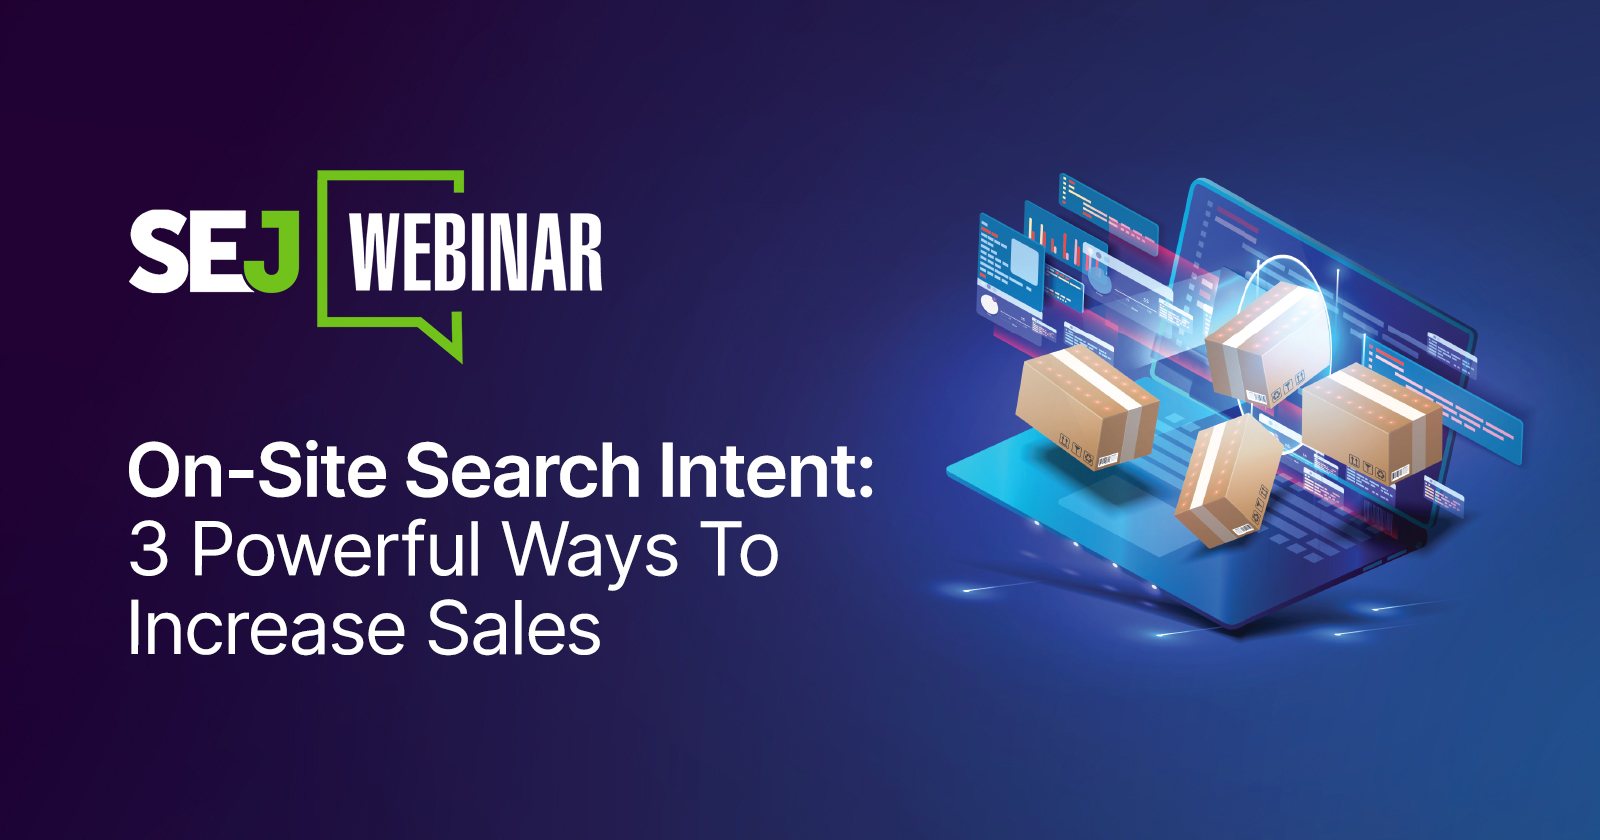 On-Site Search Intent: 3 Powerful Ways To Increase Sales via @sejournal, @hethr_campbell